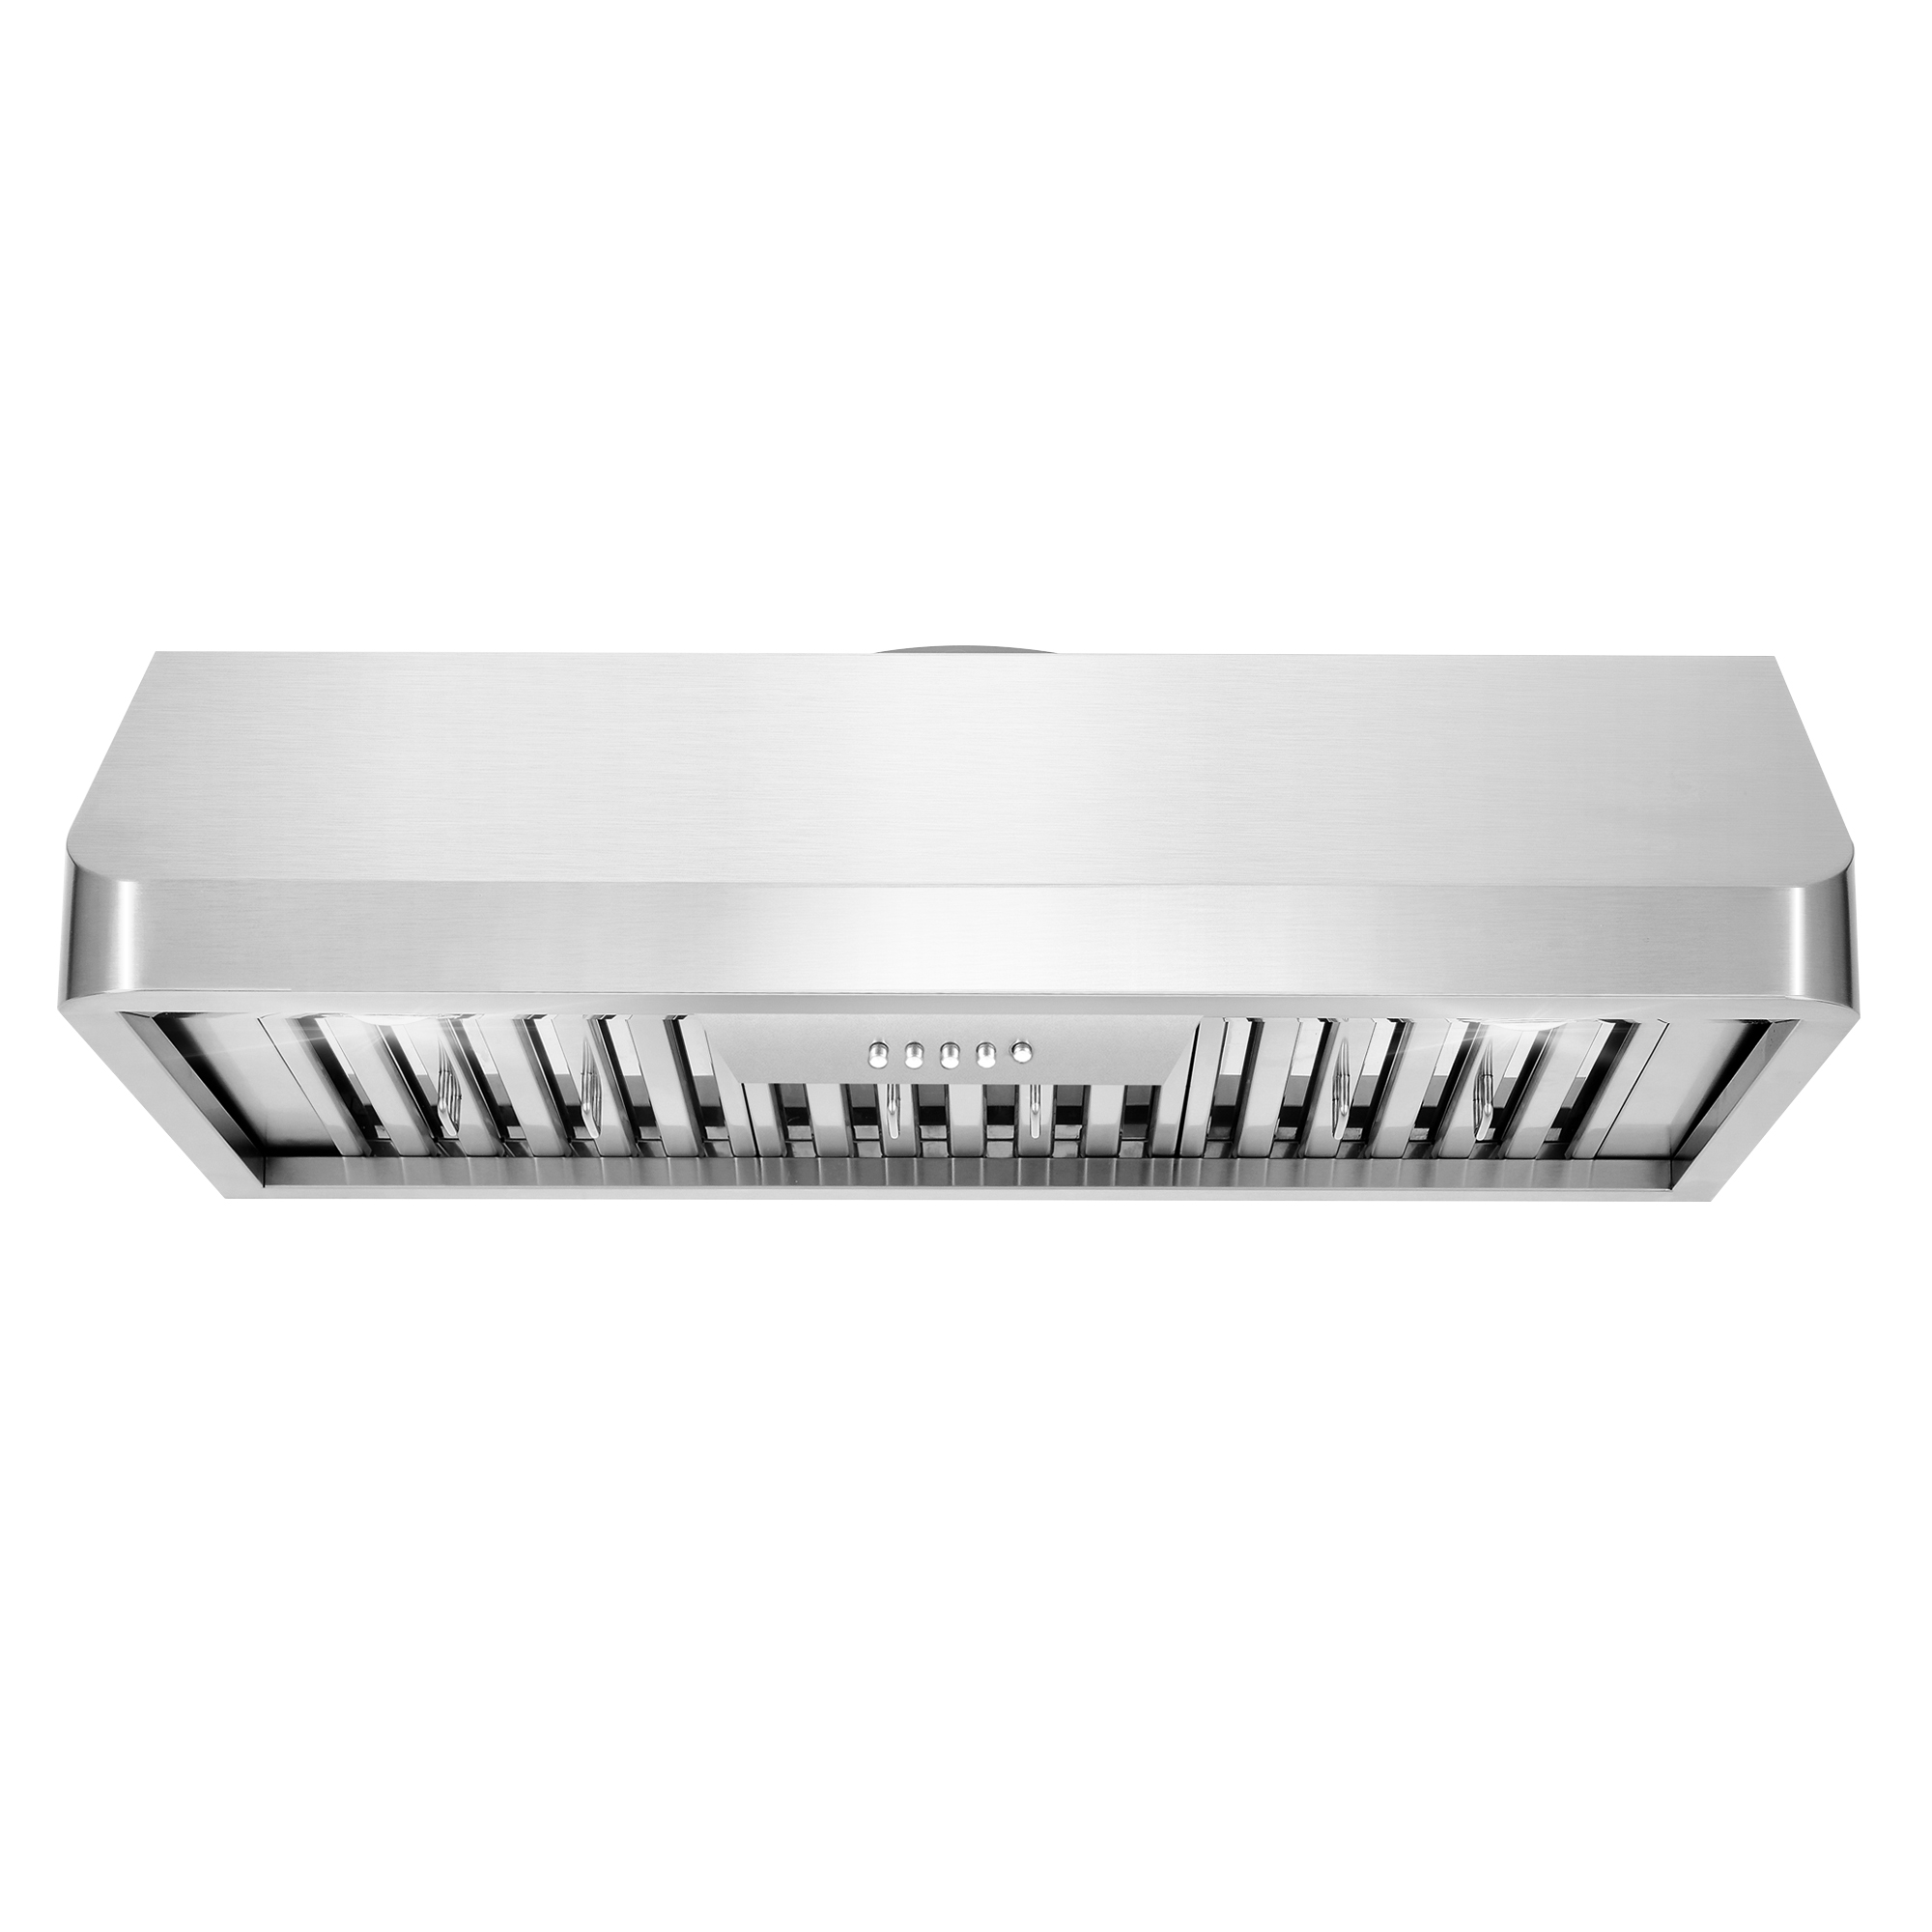 Cosmo Appliances COS-QB75-PA 30 in. 500 CFM Ducted Under Cabinet Range Hood  with Push Button Control Panel, Permanent Filters and LED Lighting